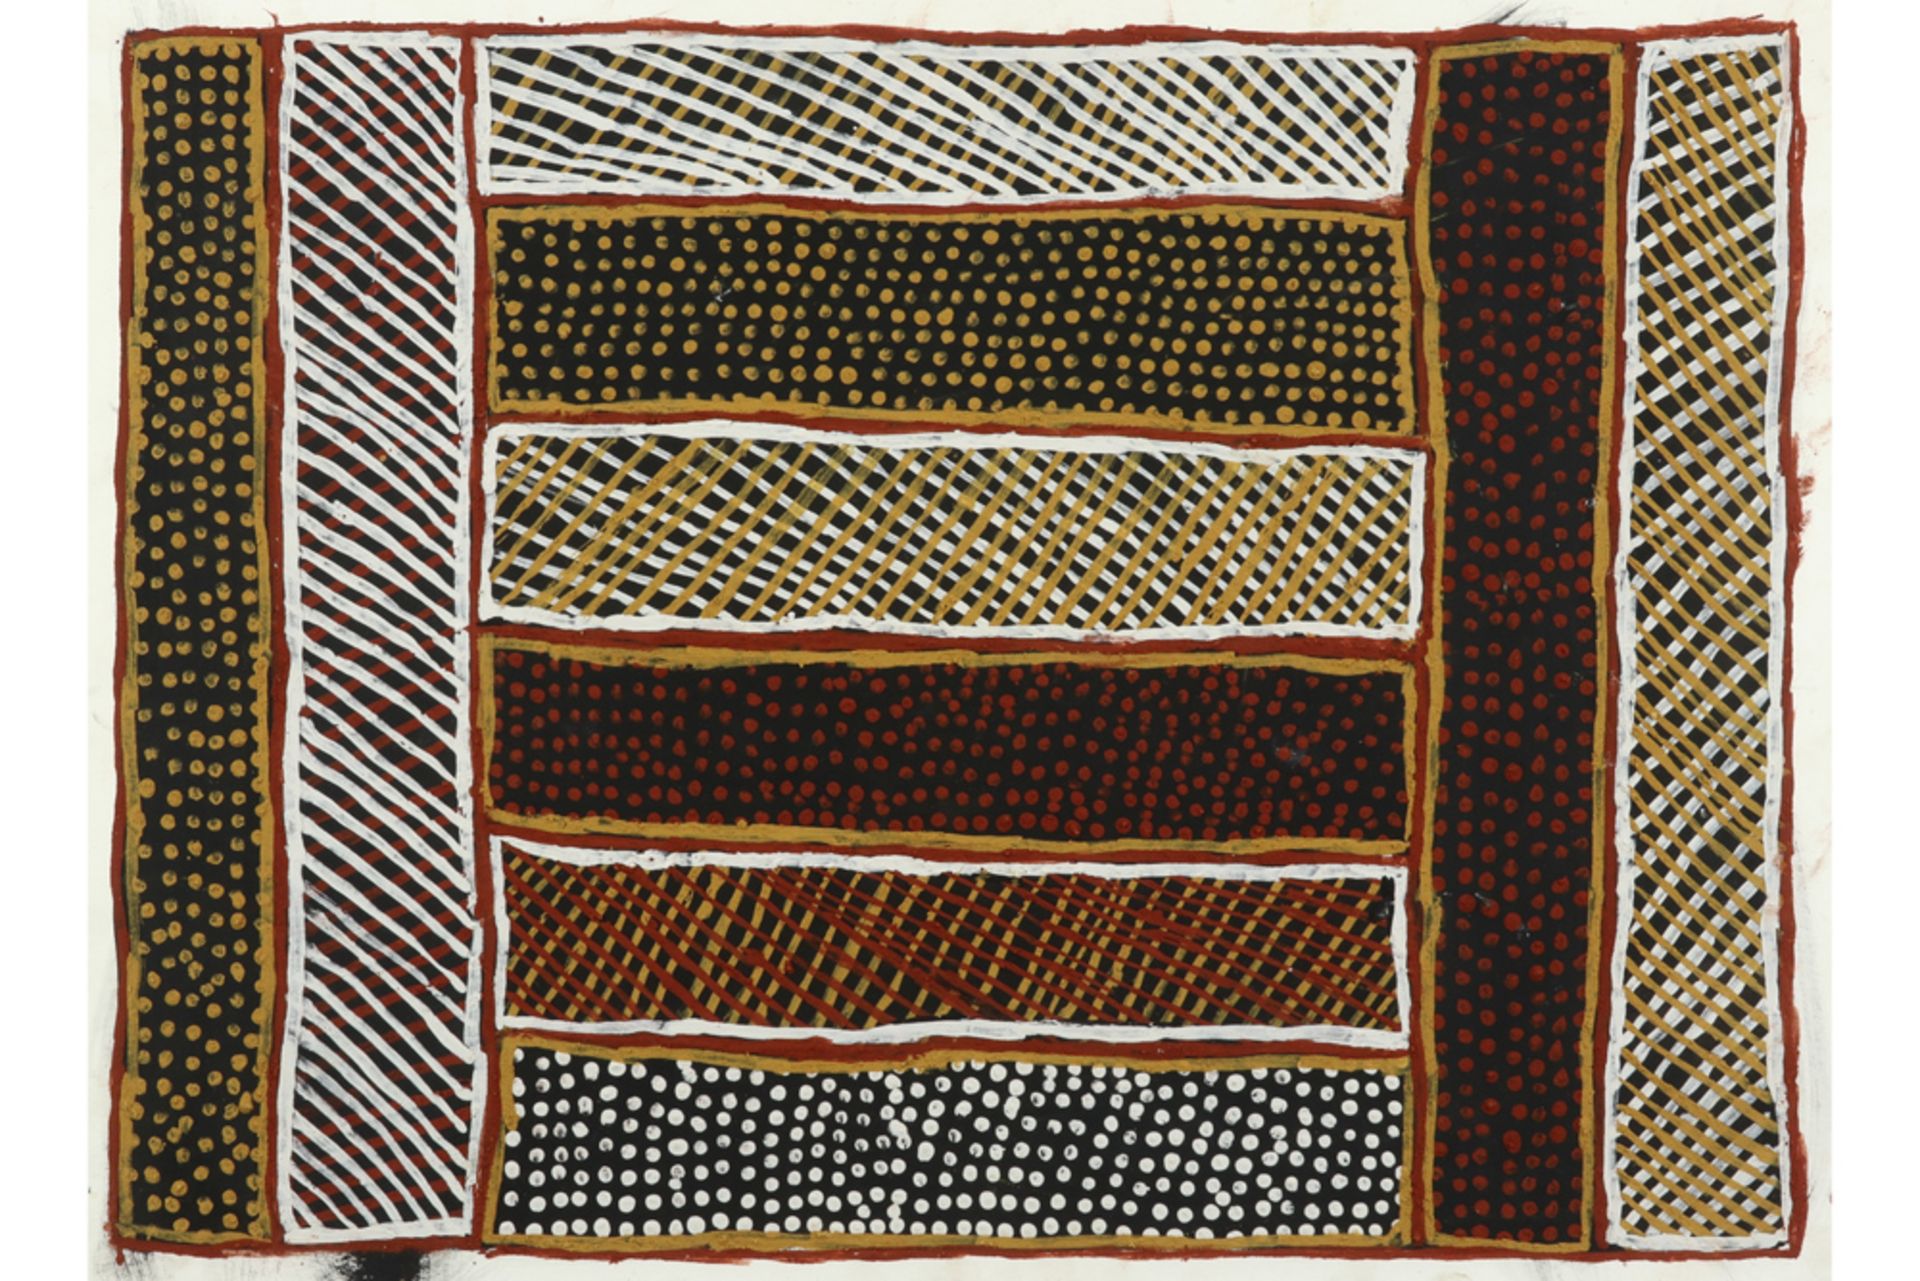 Australian Aboriginal Art from the Tiwi Islands : a painting by Jean-Baptist Apuatimi with